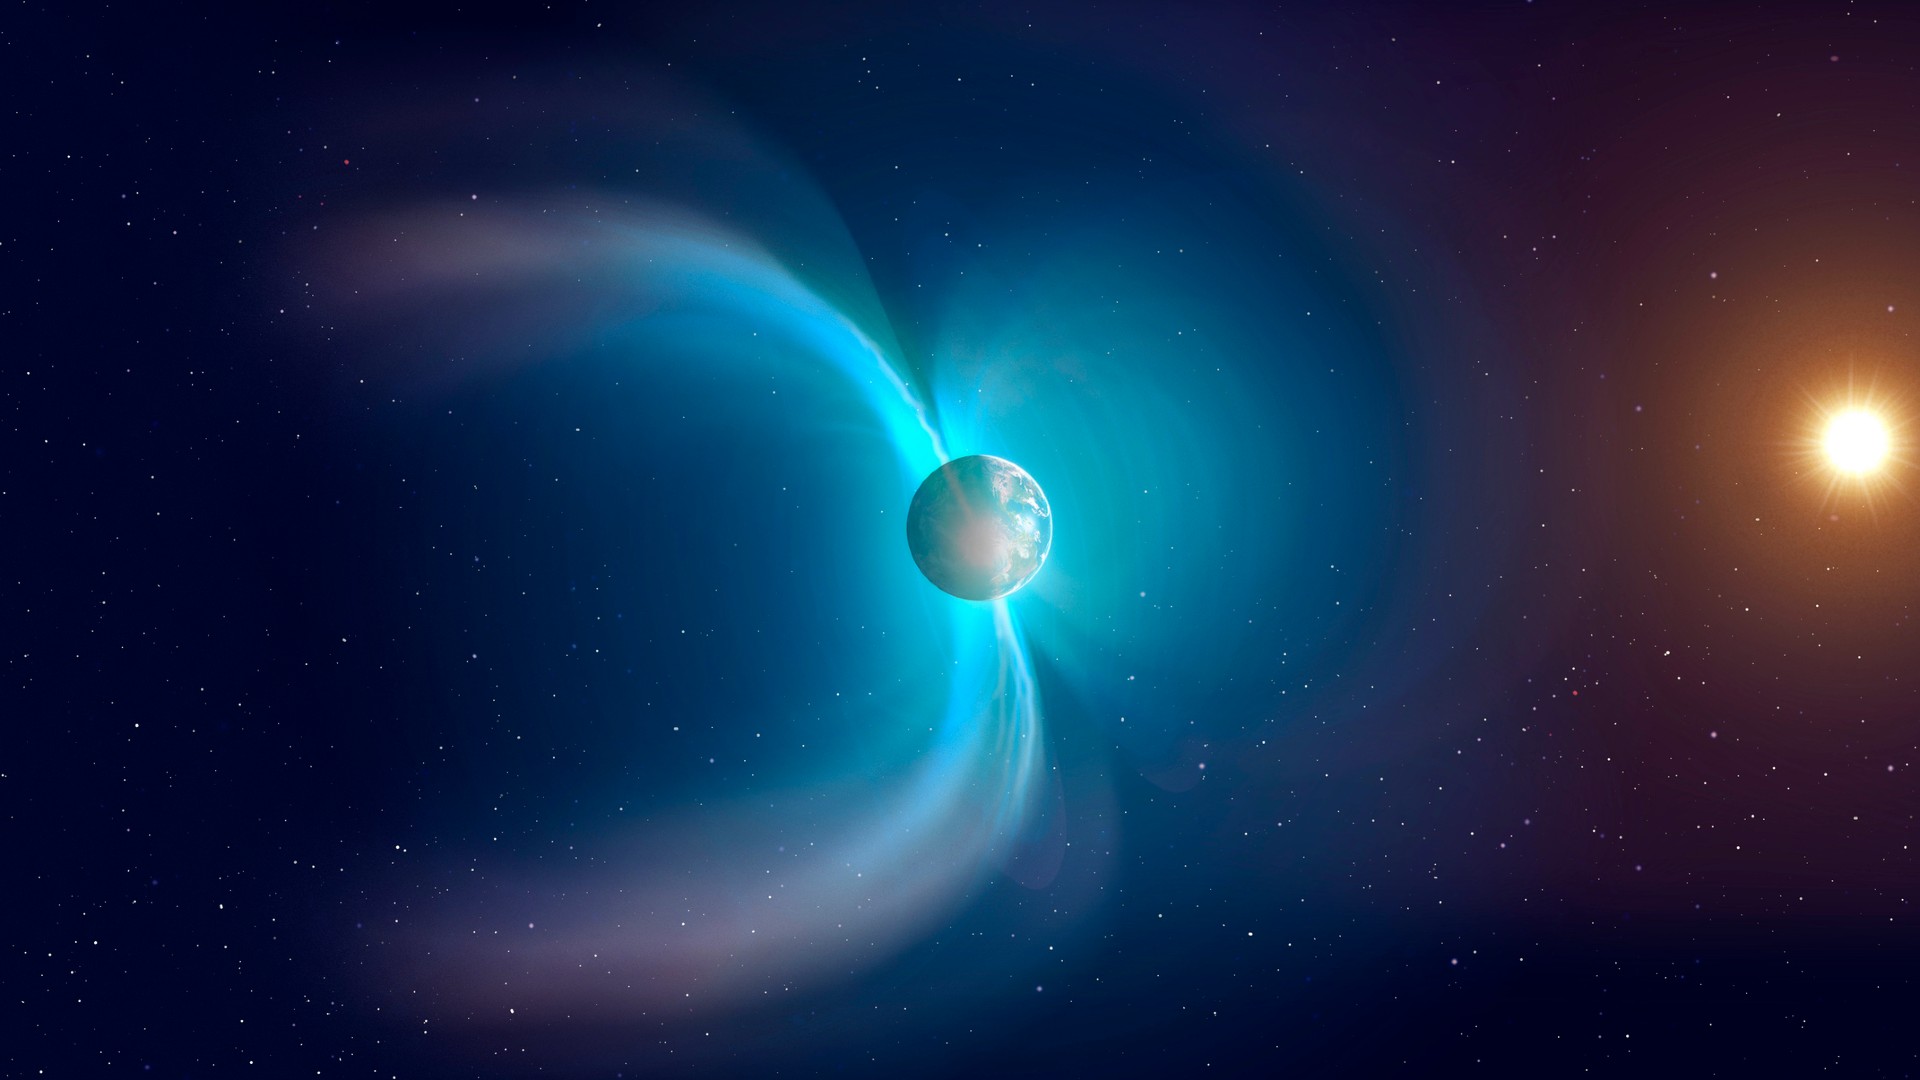 Space mysteries: Why do Earth’s magnetic poles flip?